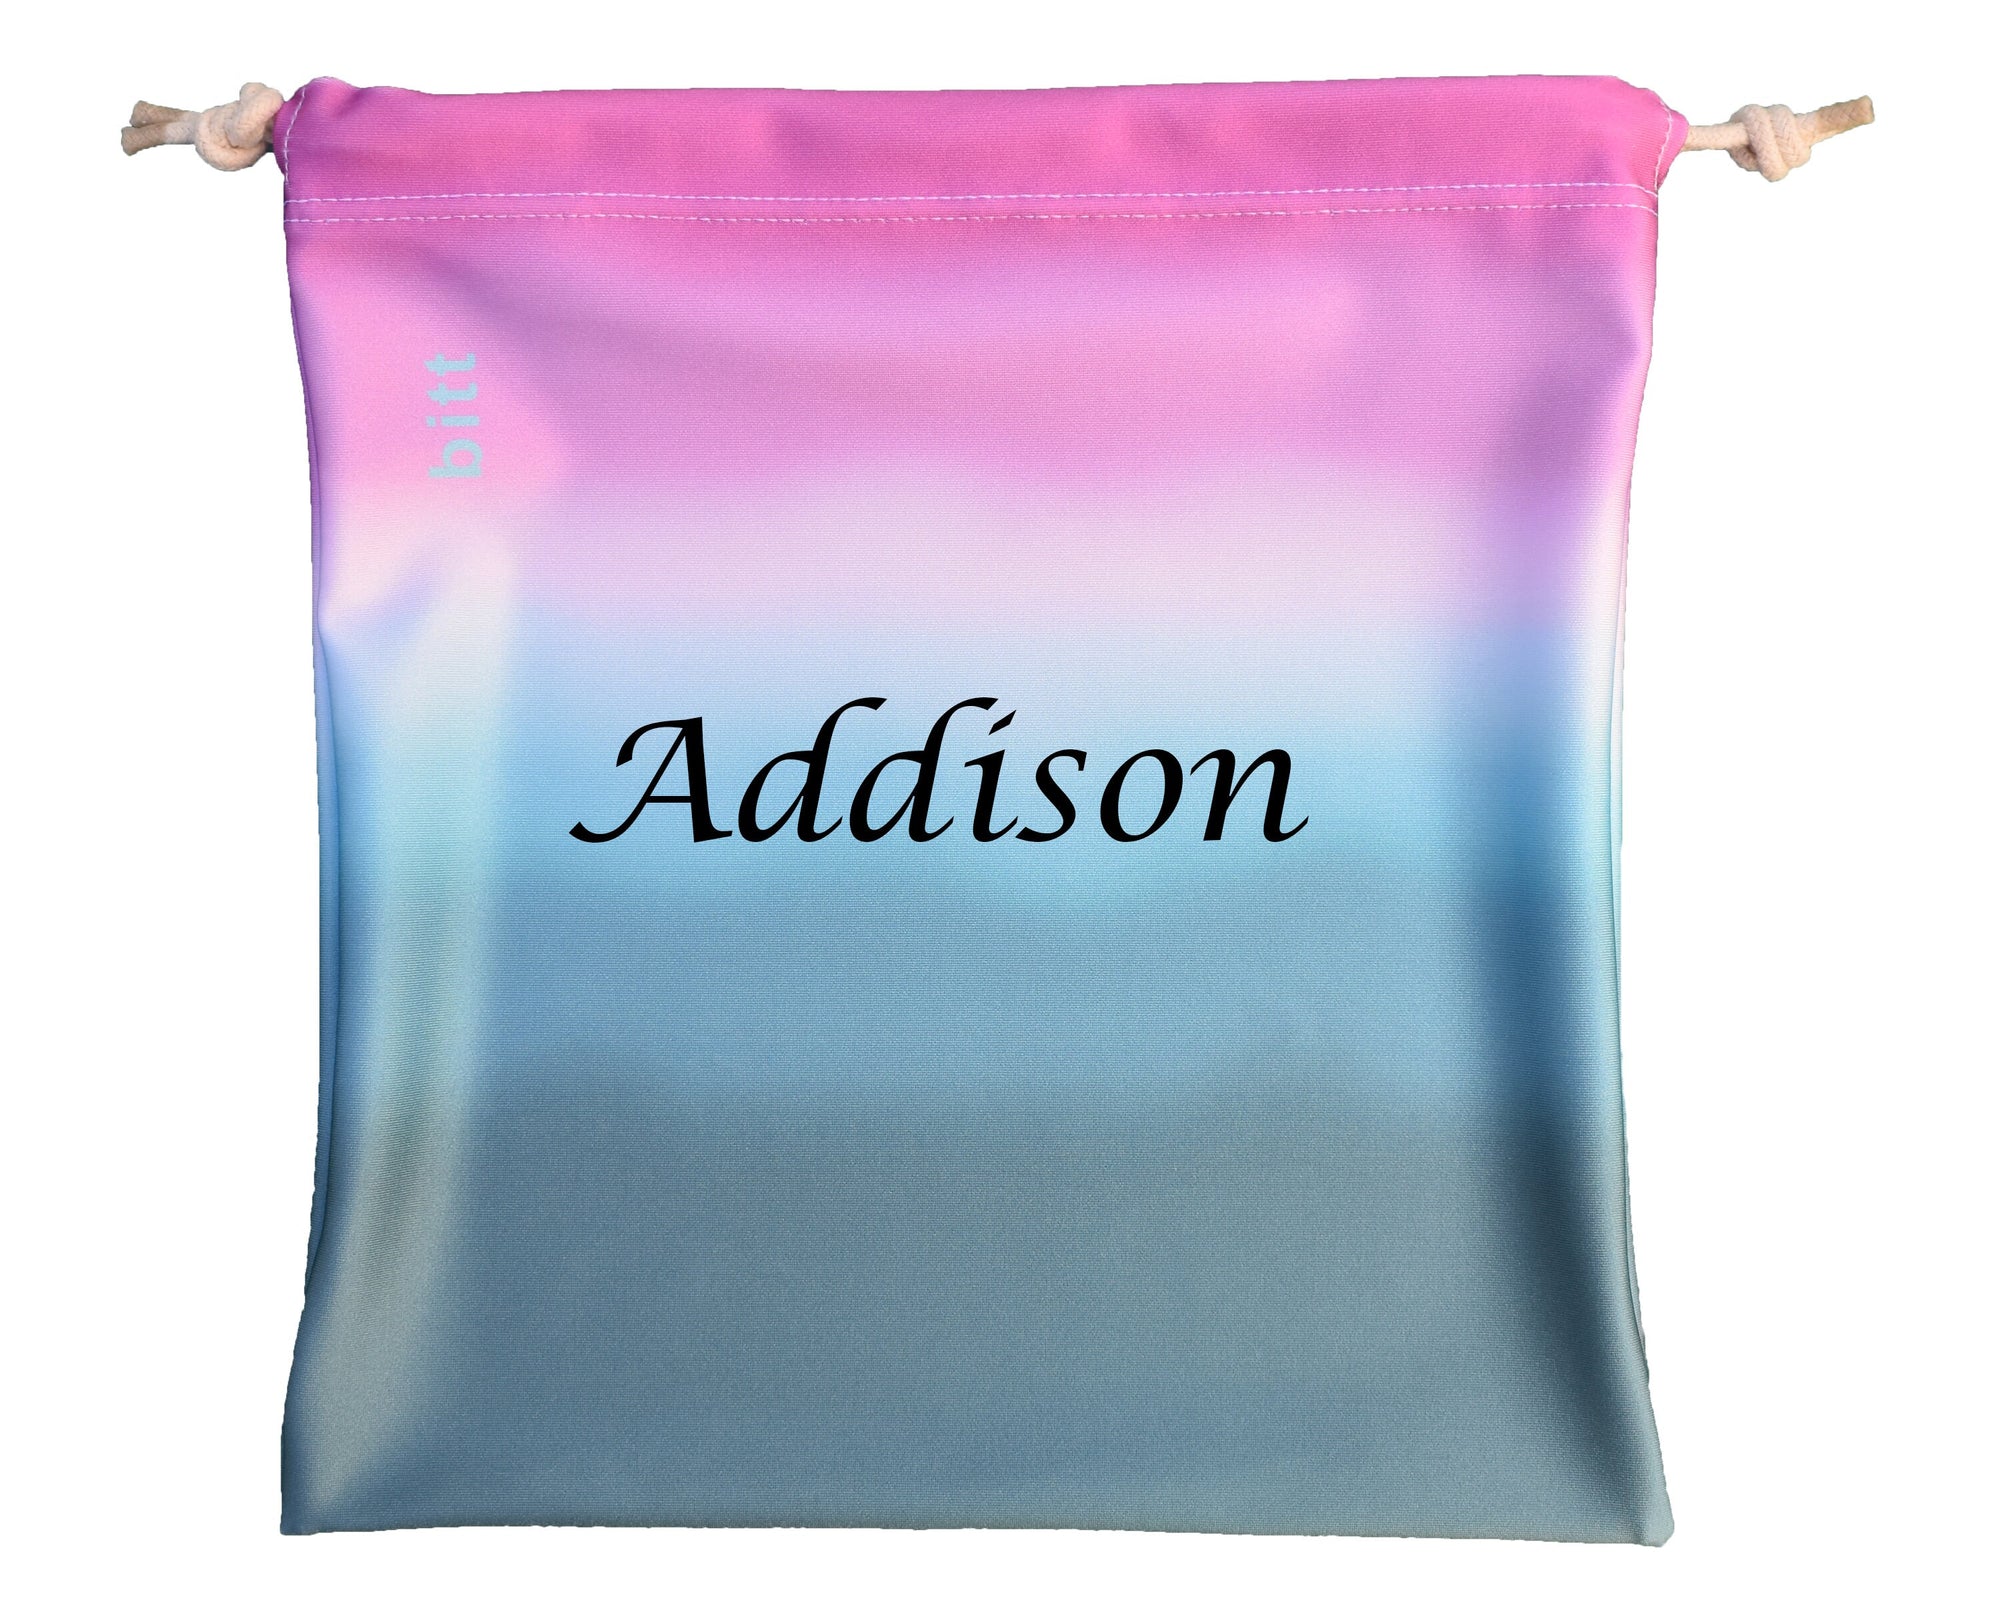 Personalized Gymnastics Grip Bag in Teal Pink Ombre